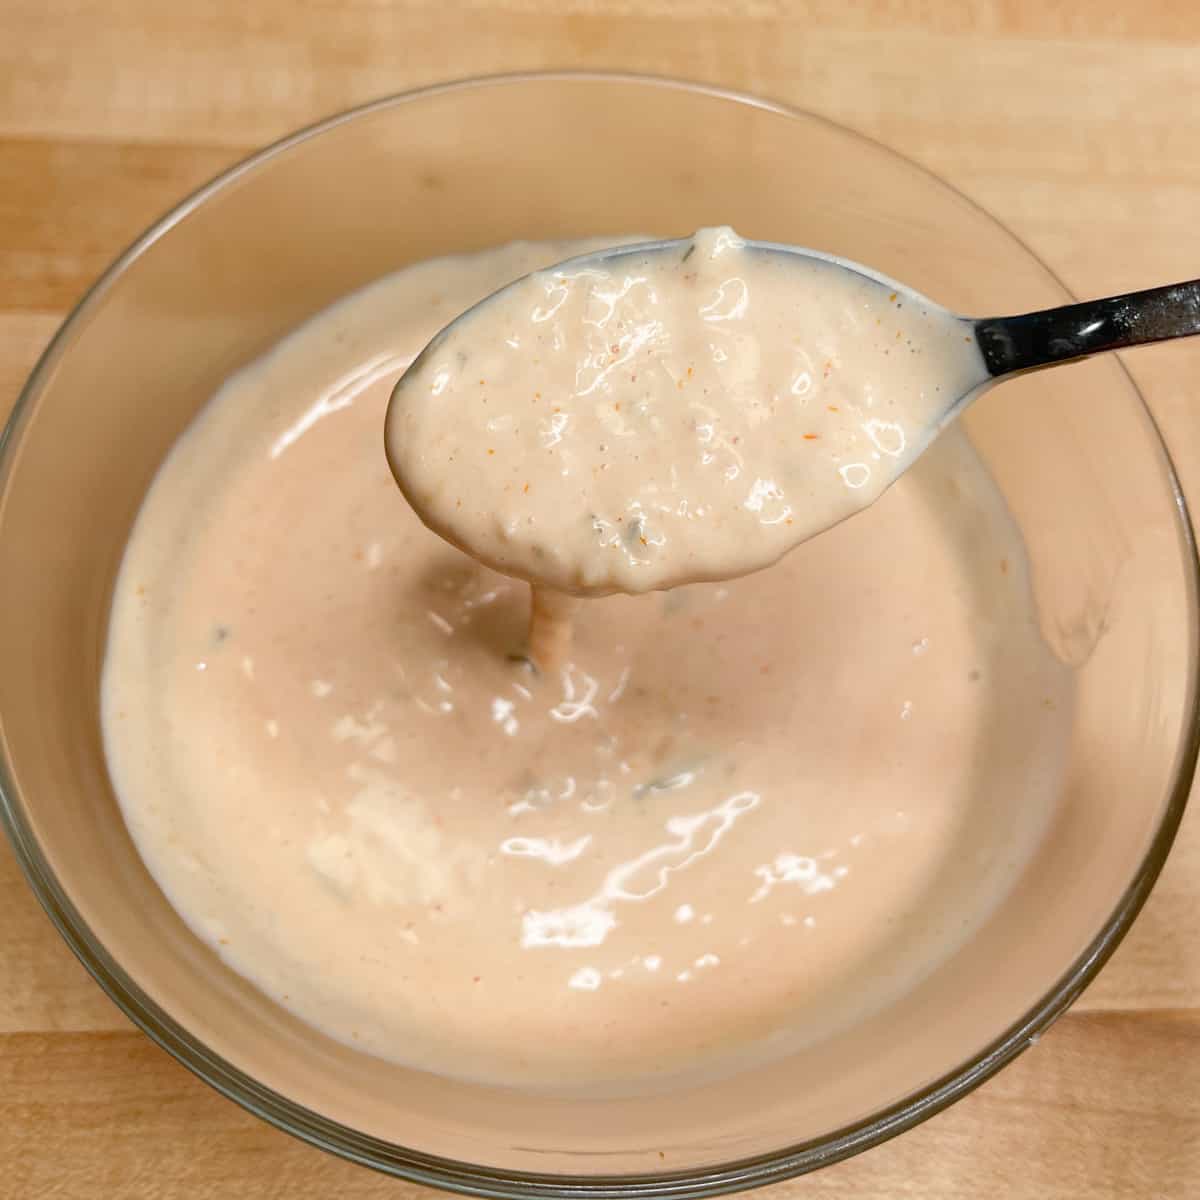 Special sauce ingredients mixed together in a glass bowl with a spoonful showing. 